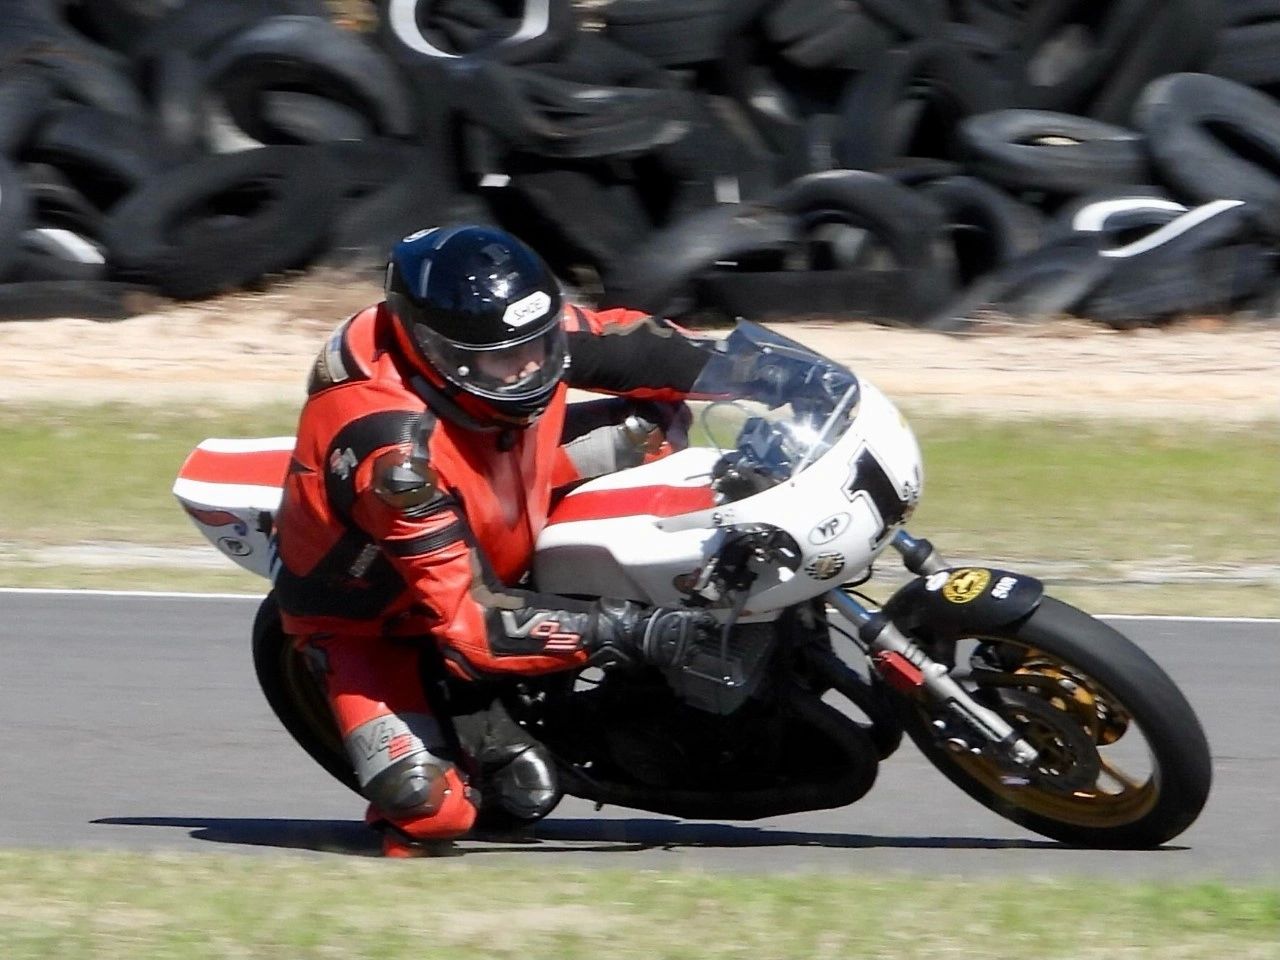 Mark Morrow Road Racing School and Services